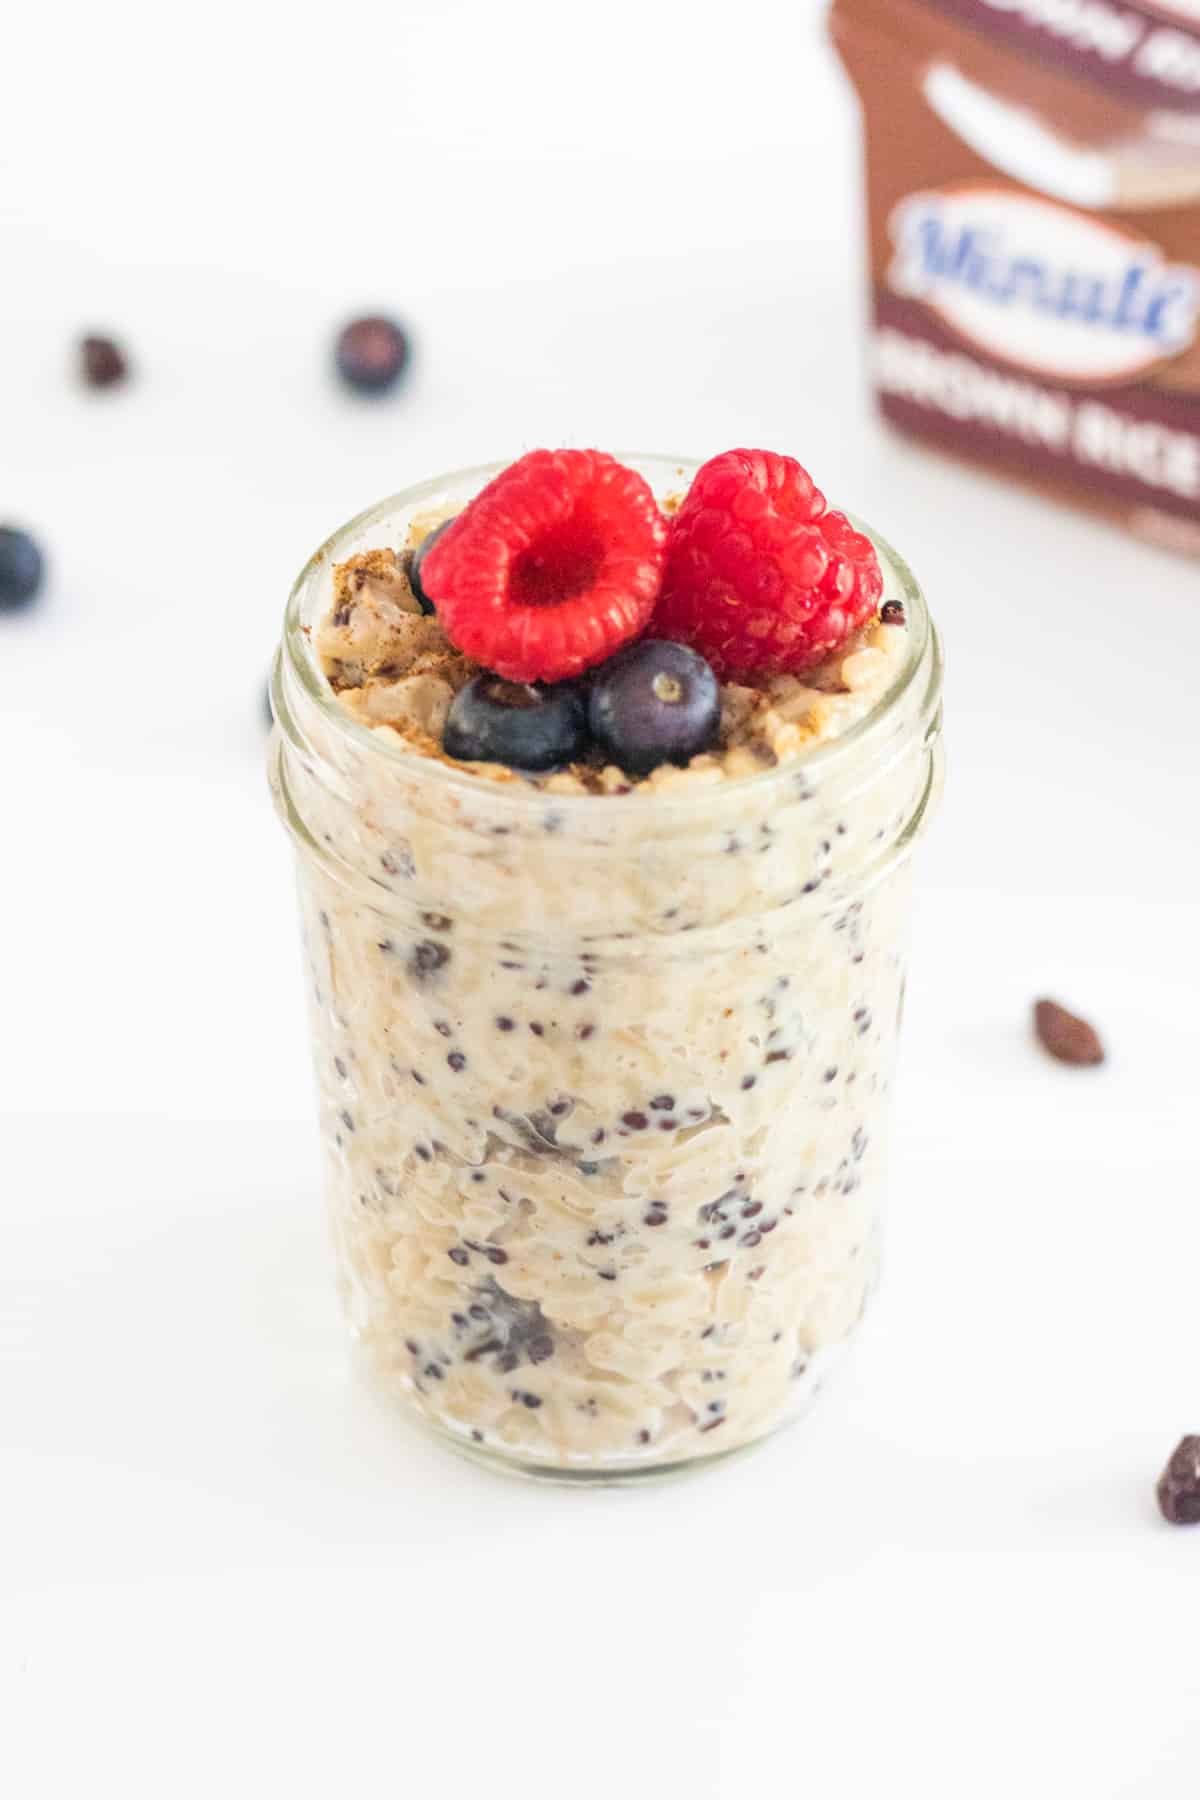 Brown Sugar and Quinoa Rice Pudding topped with fresh berries